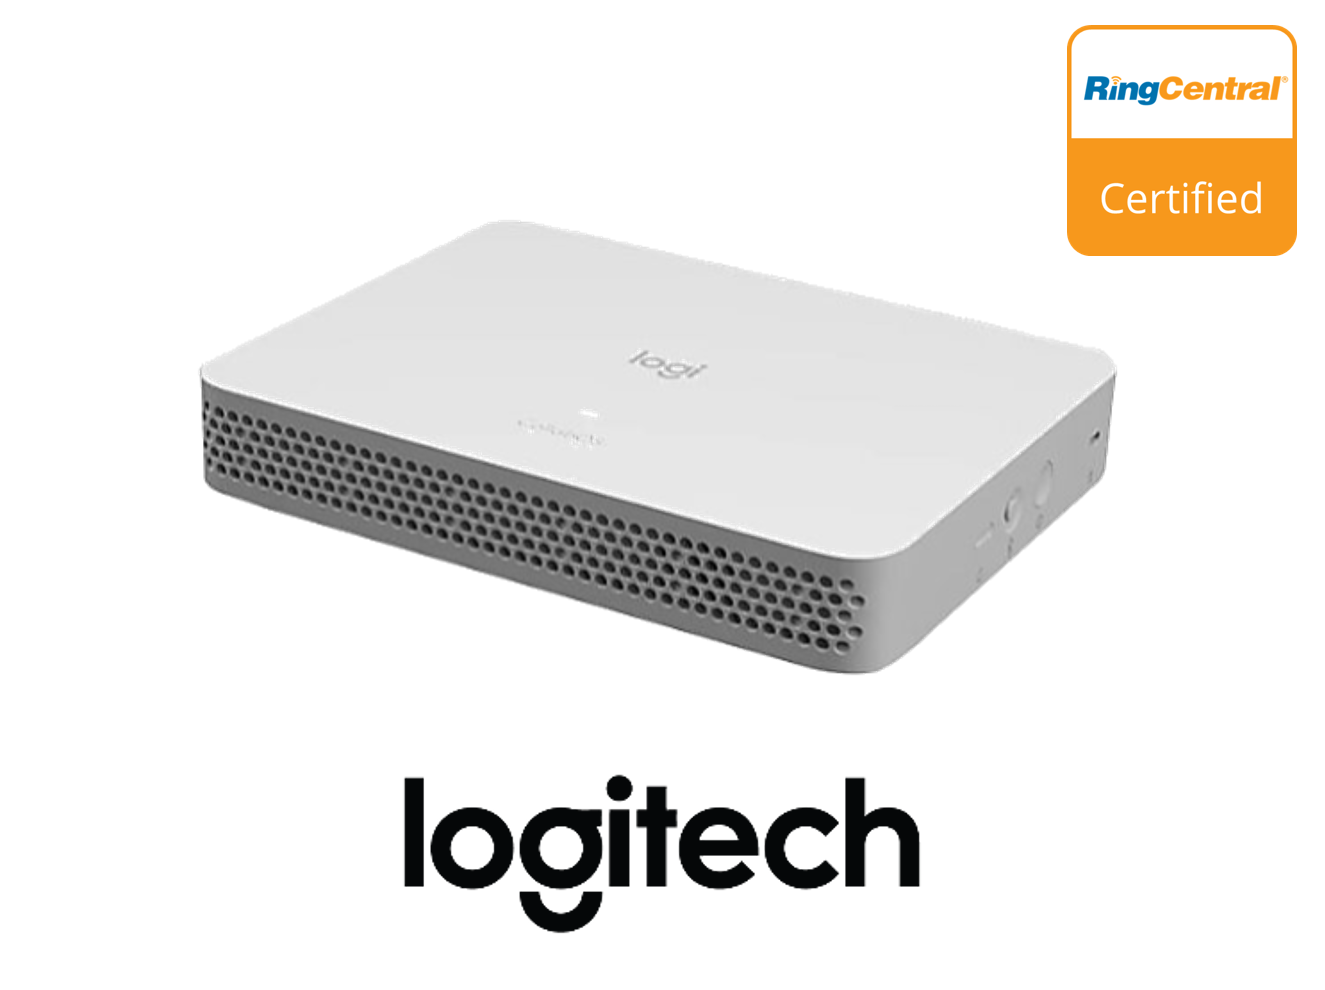 Logitech RoomMate Comput Appliance Certified by RingCentral